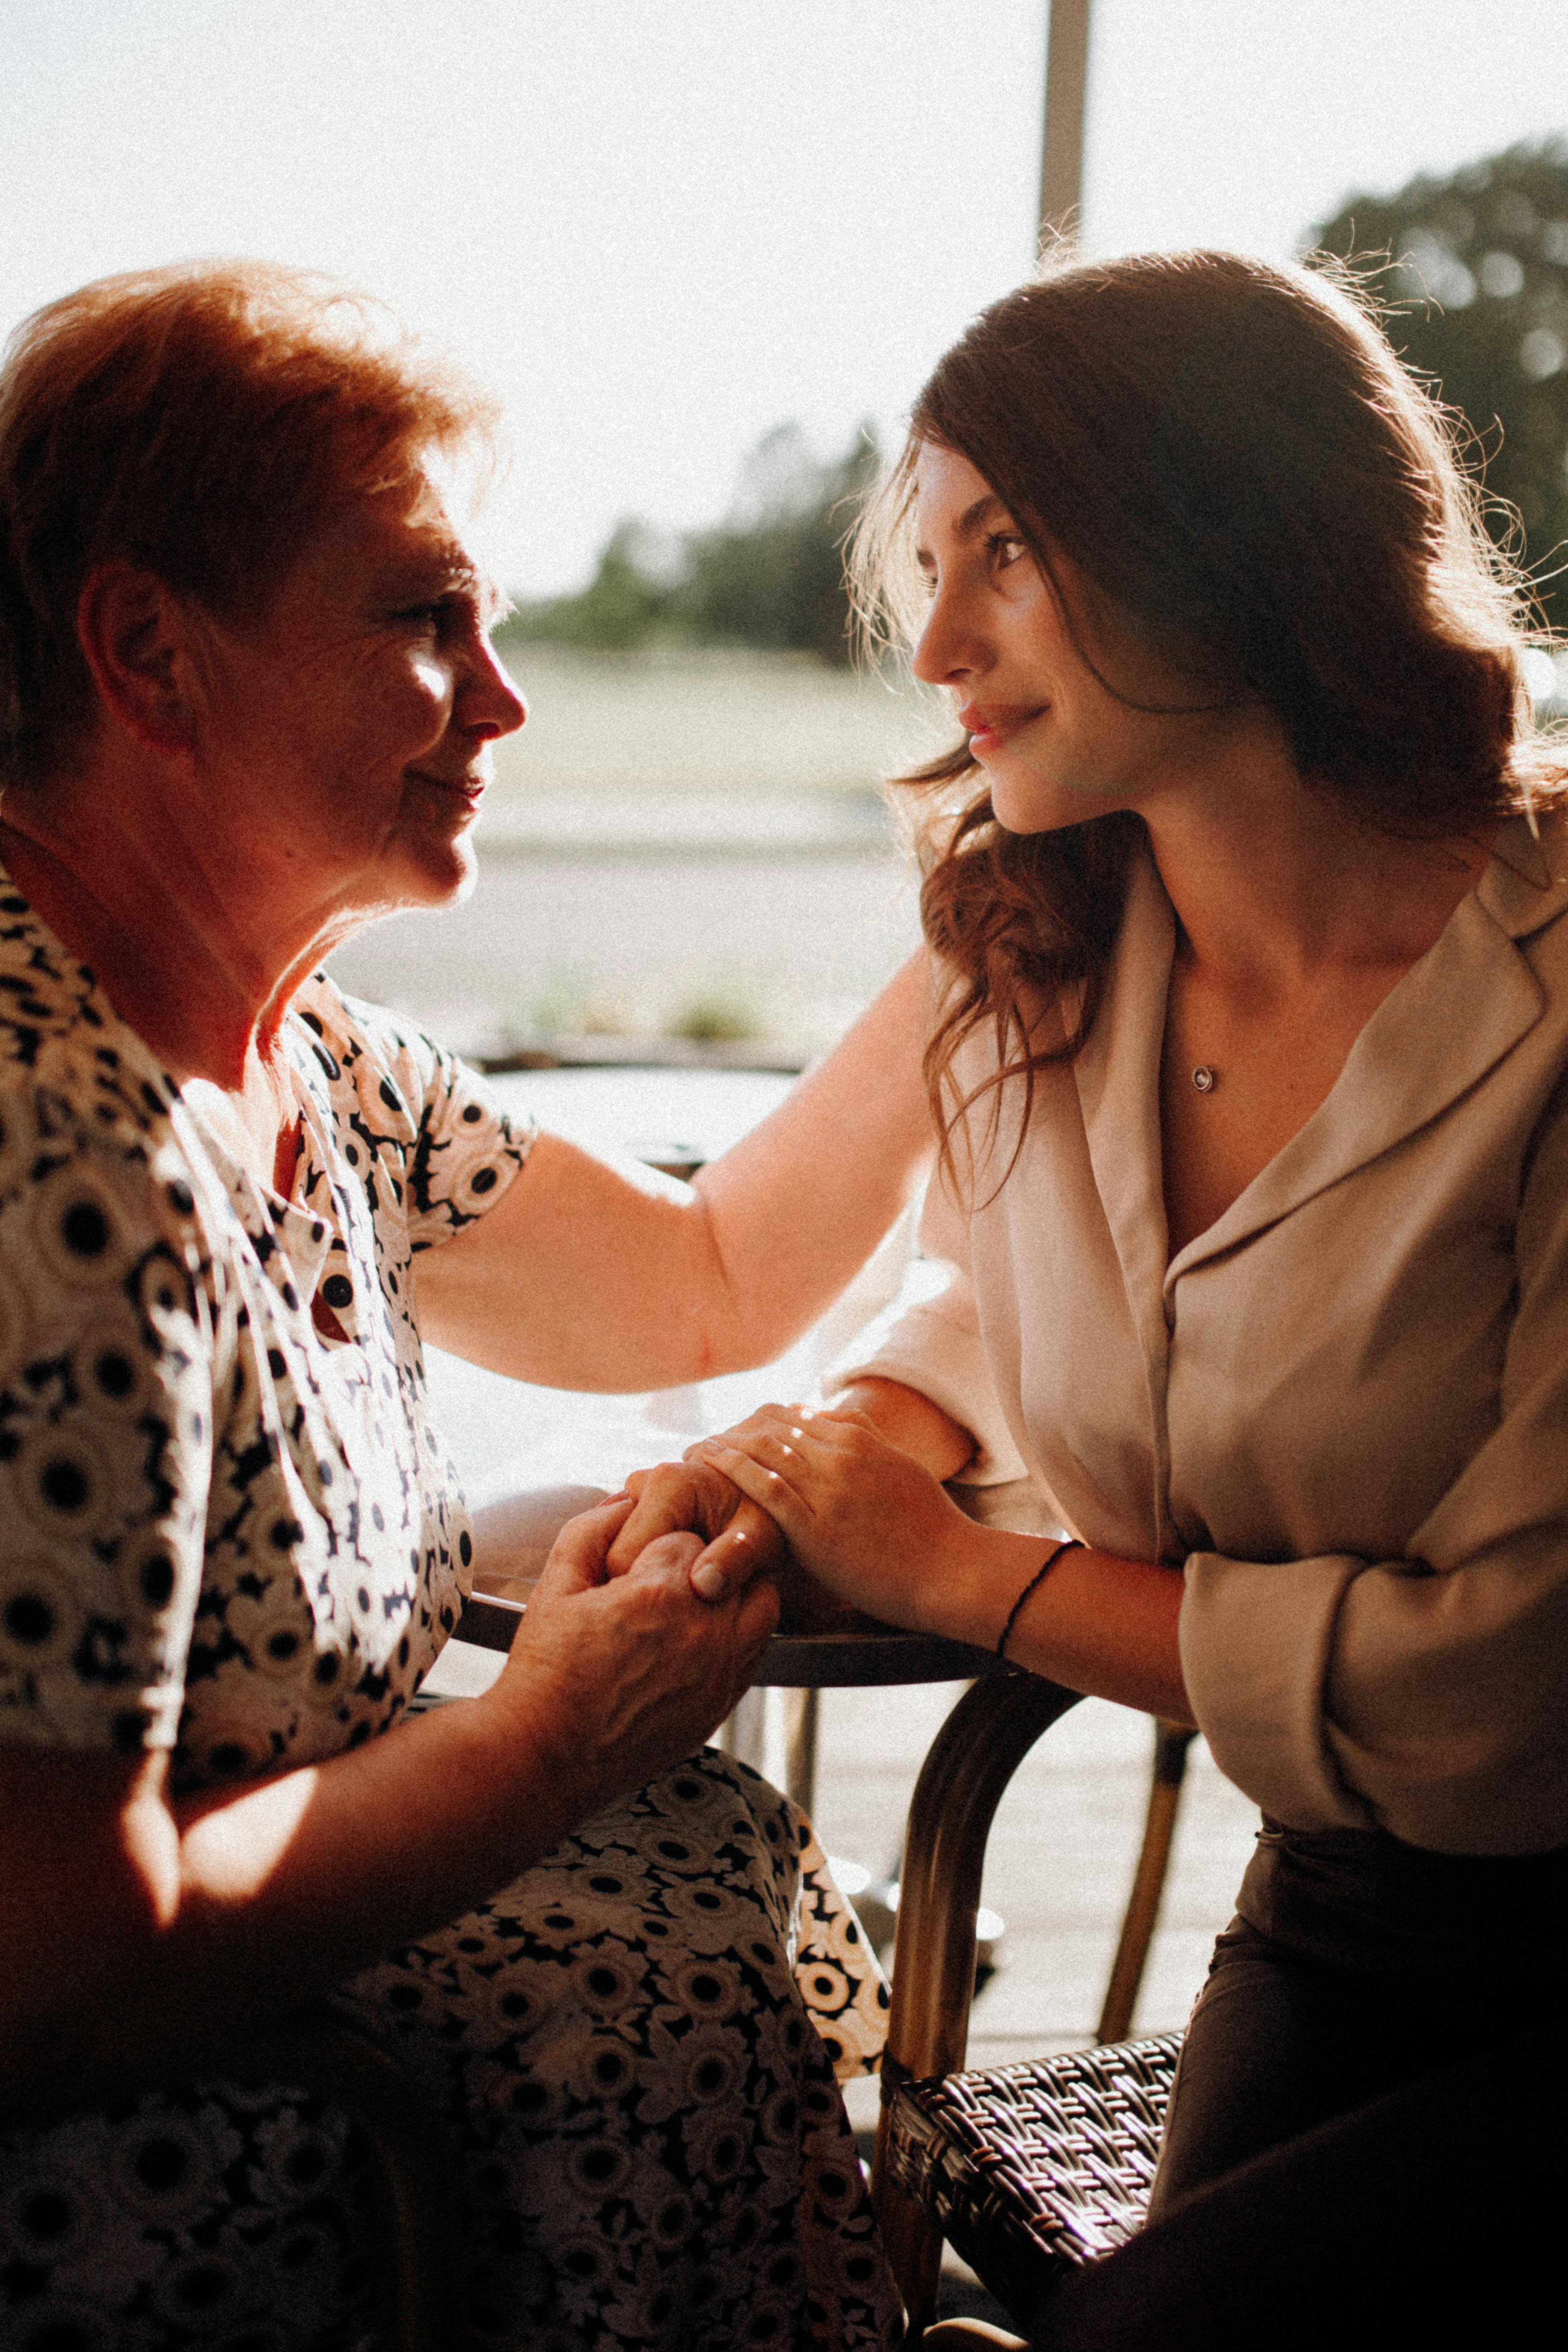 Mother and daughter sitting at the table holding hands | Source: Pexels